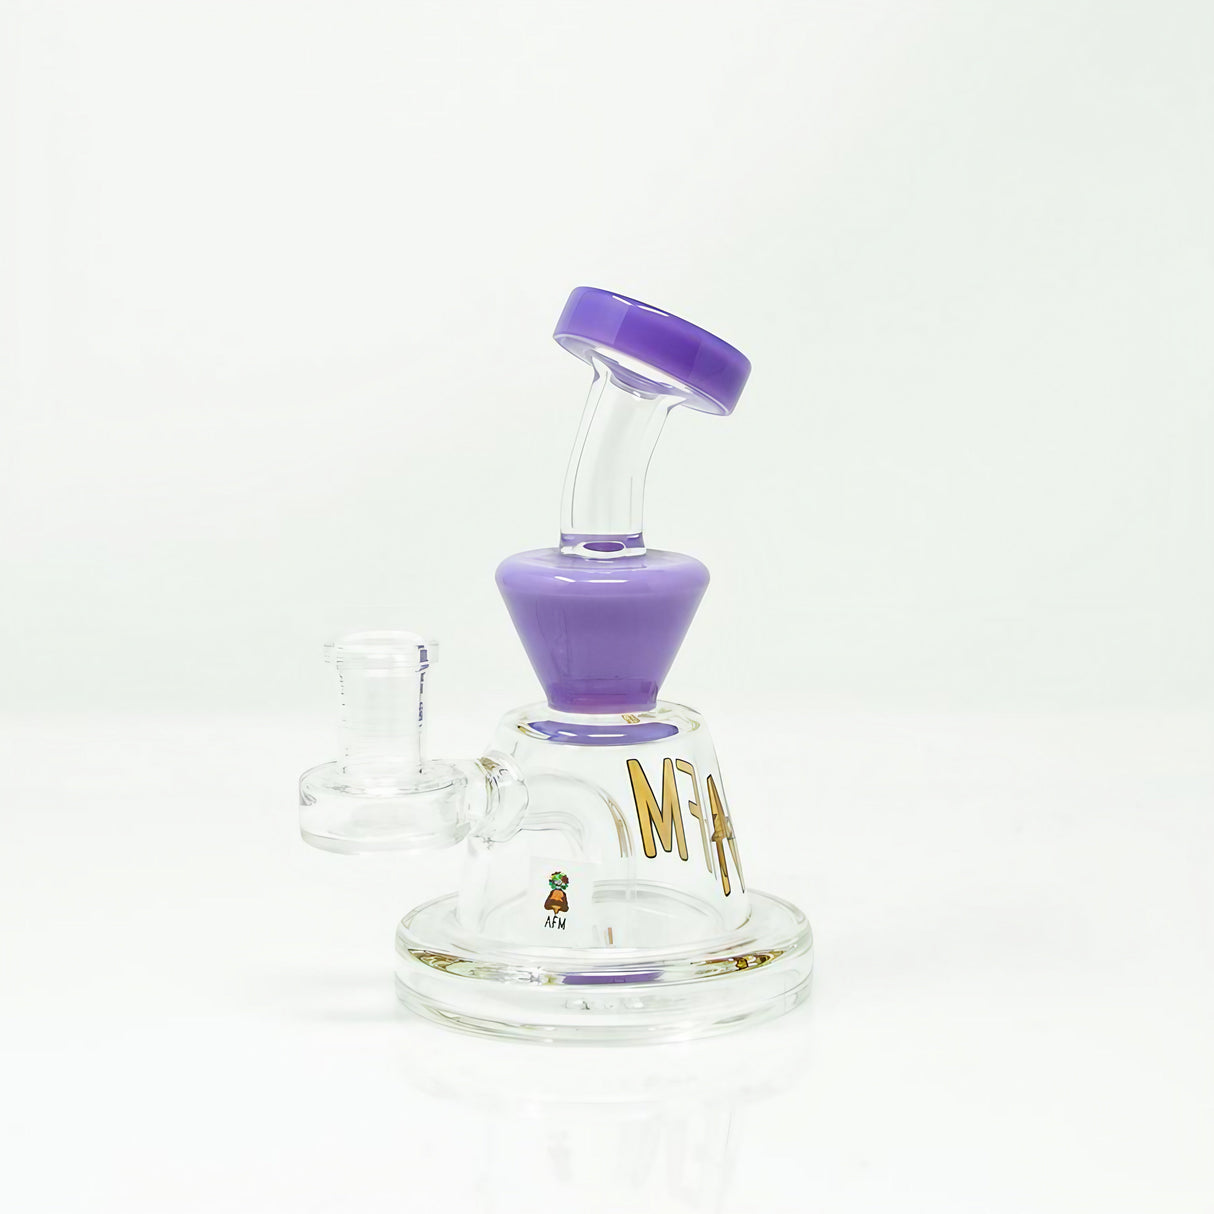 AFM Mini Rig in Purple - 5.5" Compact Borosilicate Glass Dab Rig with Percolator, Front View